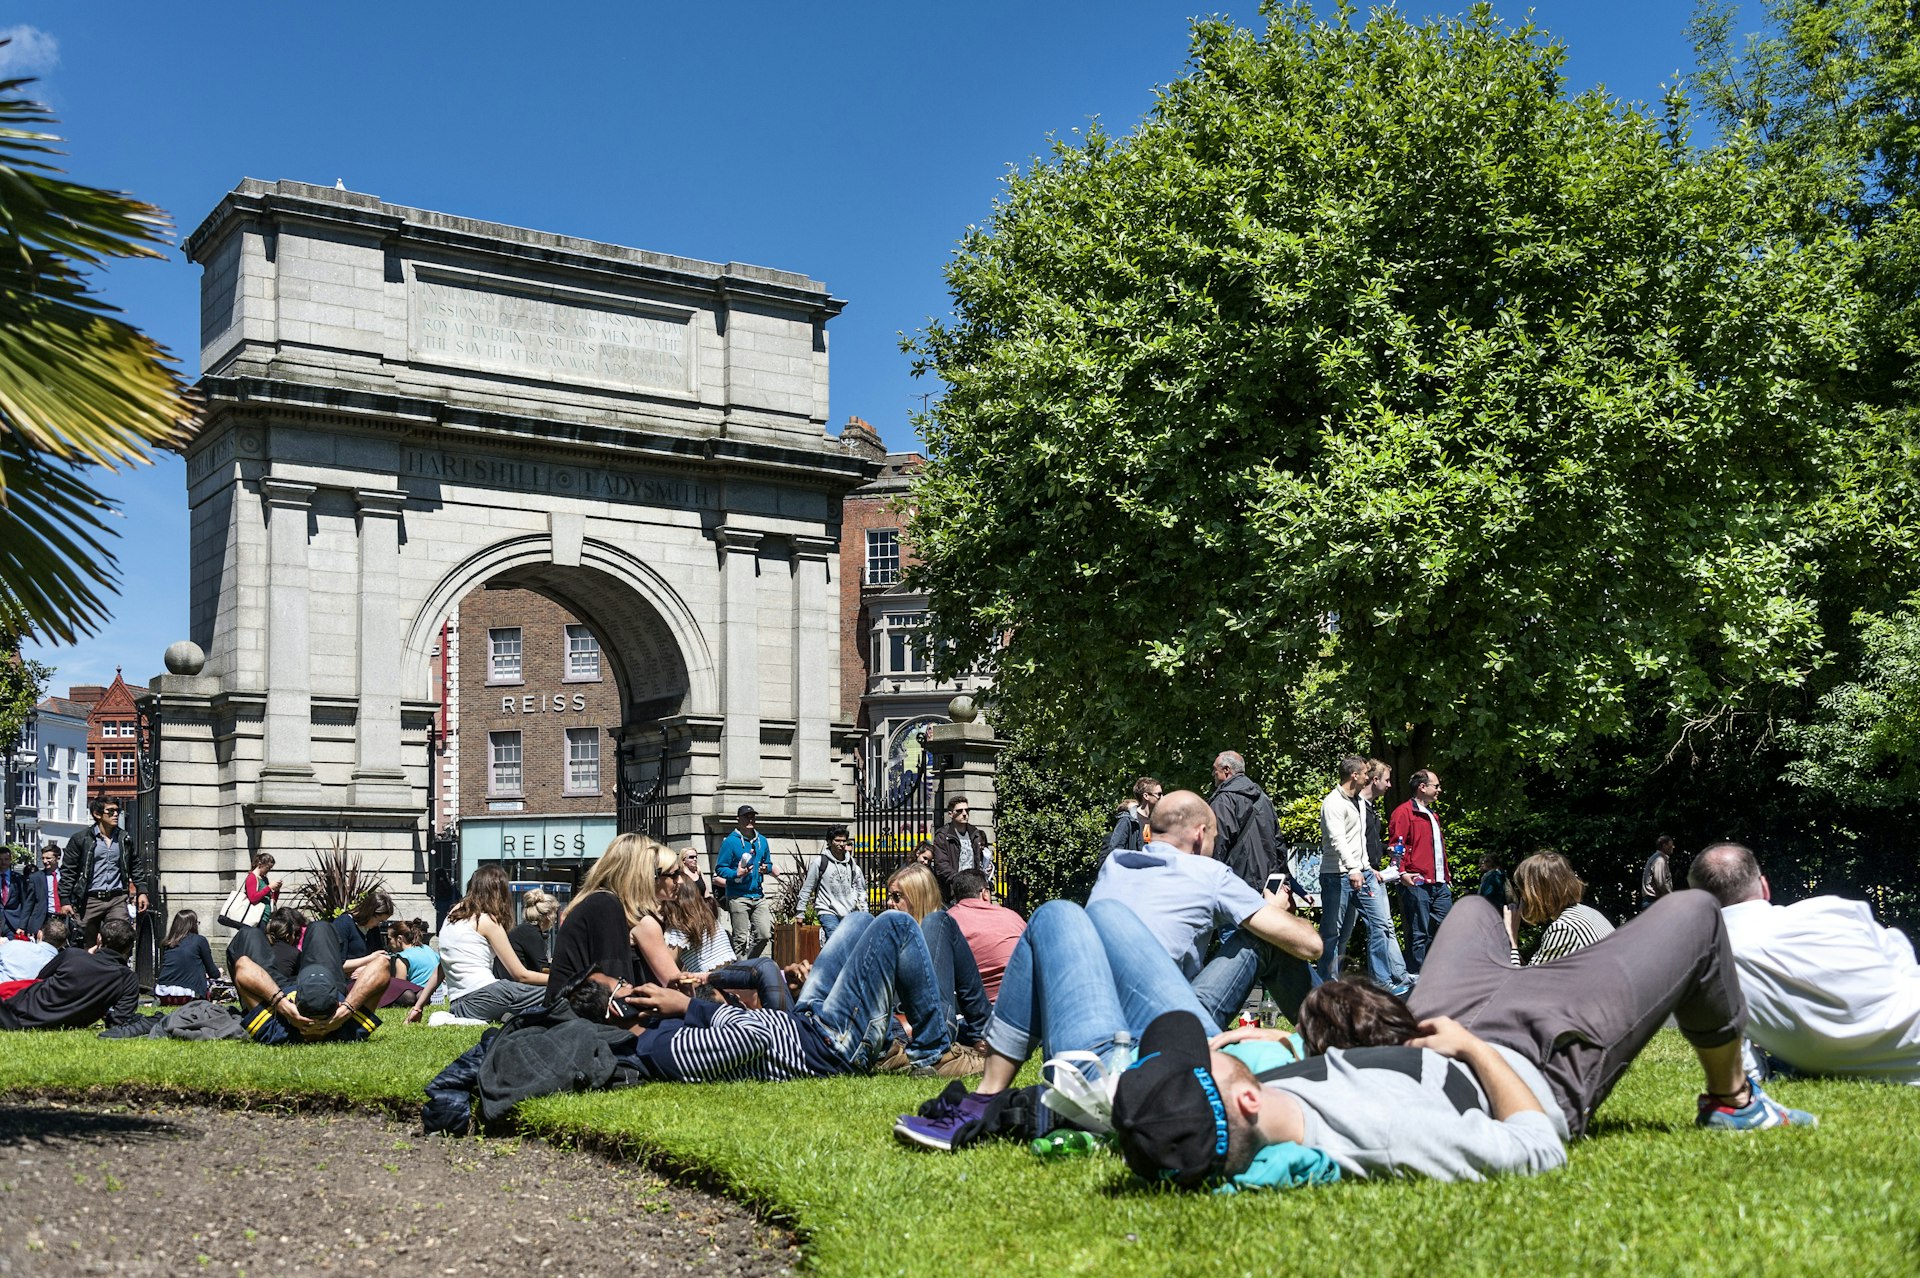 People rest on the grass next to Fusilier's Arch on a sunny day in St Stephen's Green in Dublin